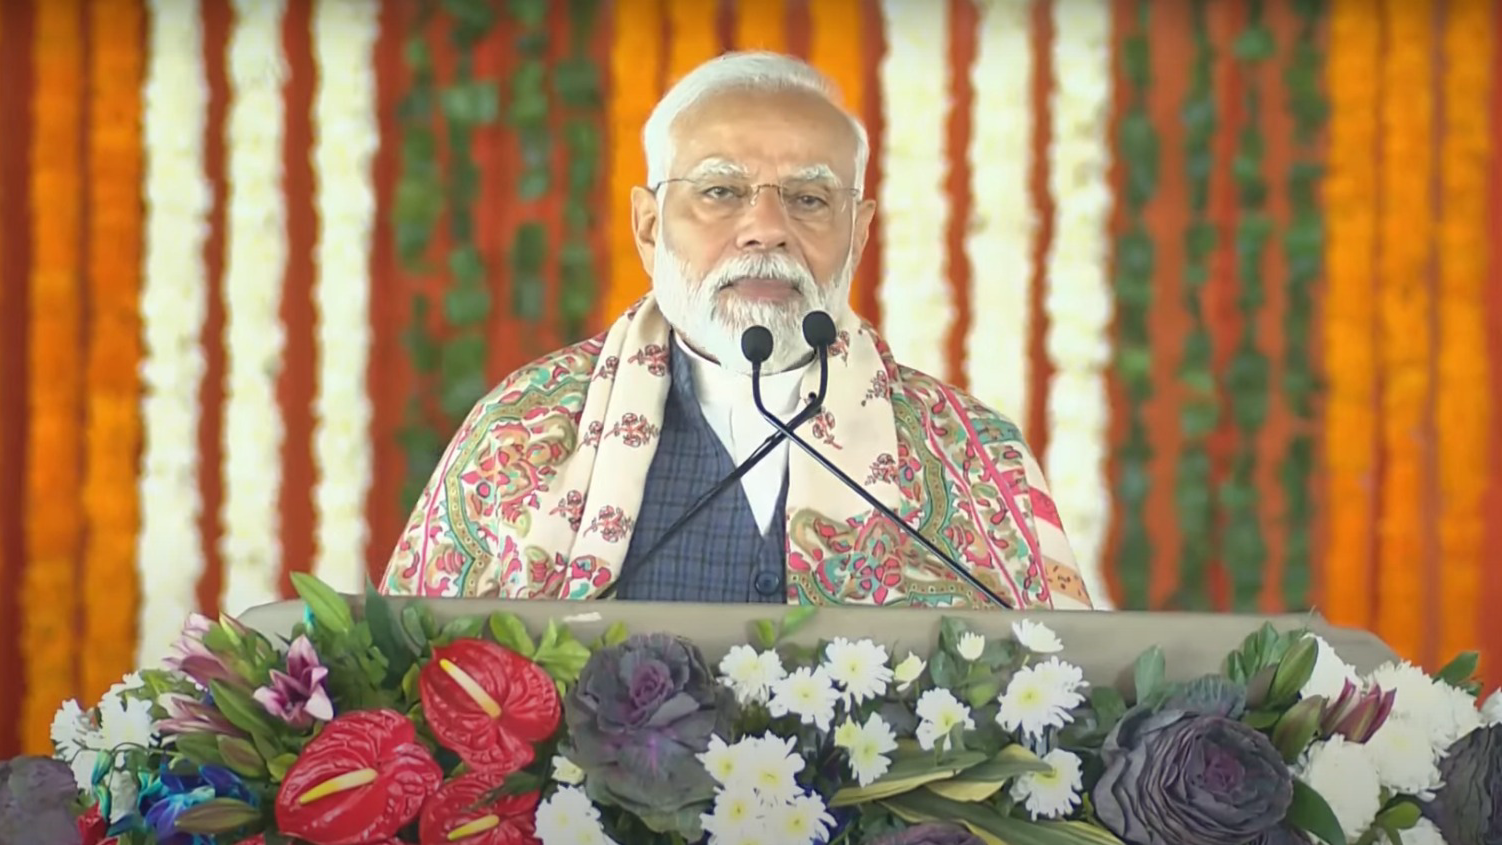 Whole country is happy with the welcome of Lord Shri Ram in Ayodhya: PM